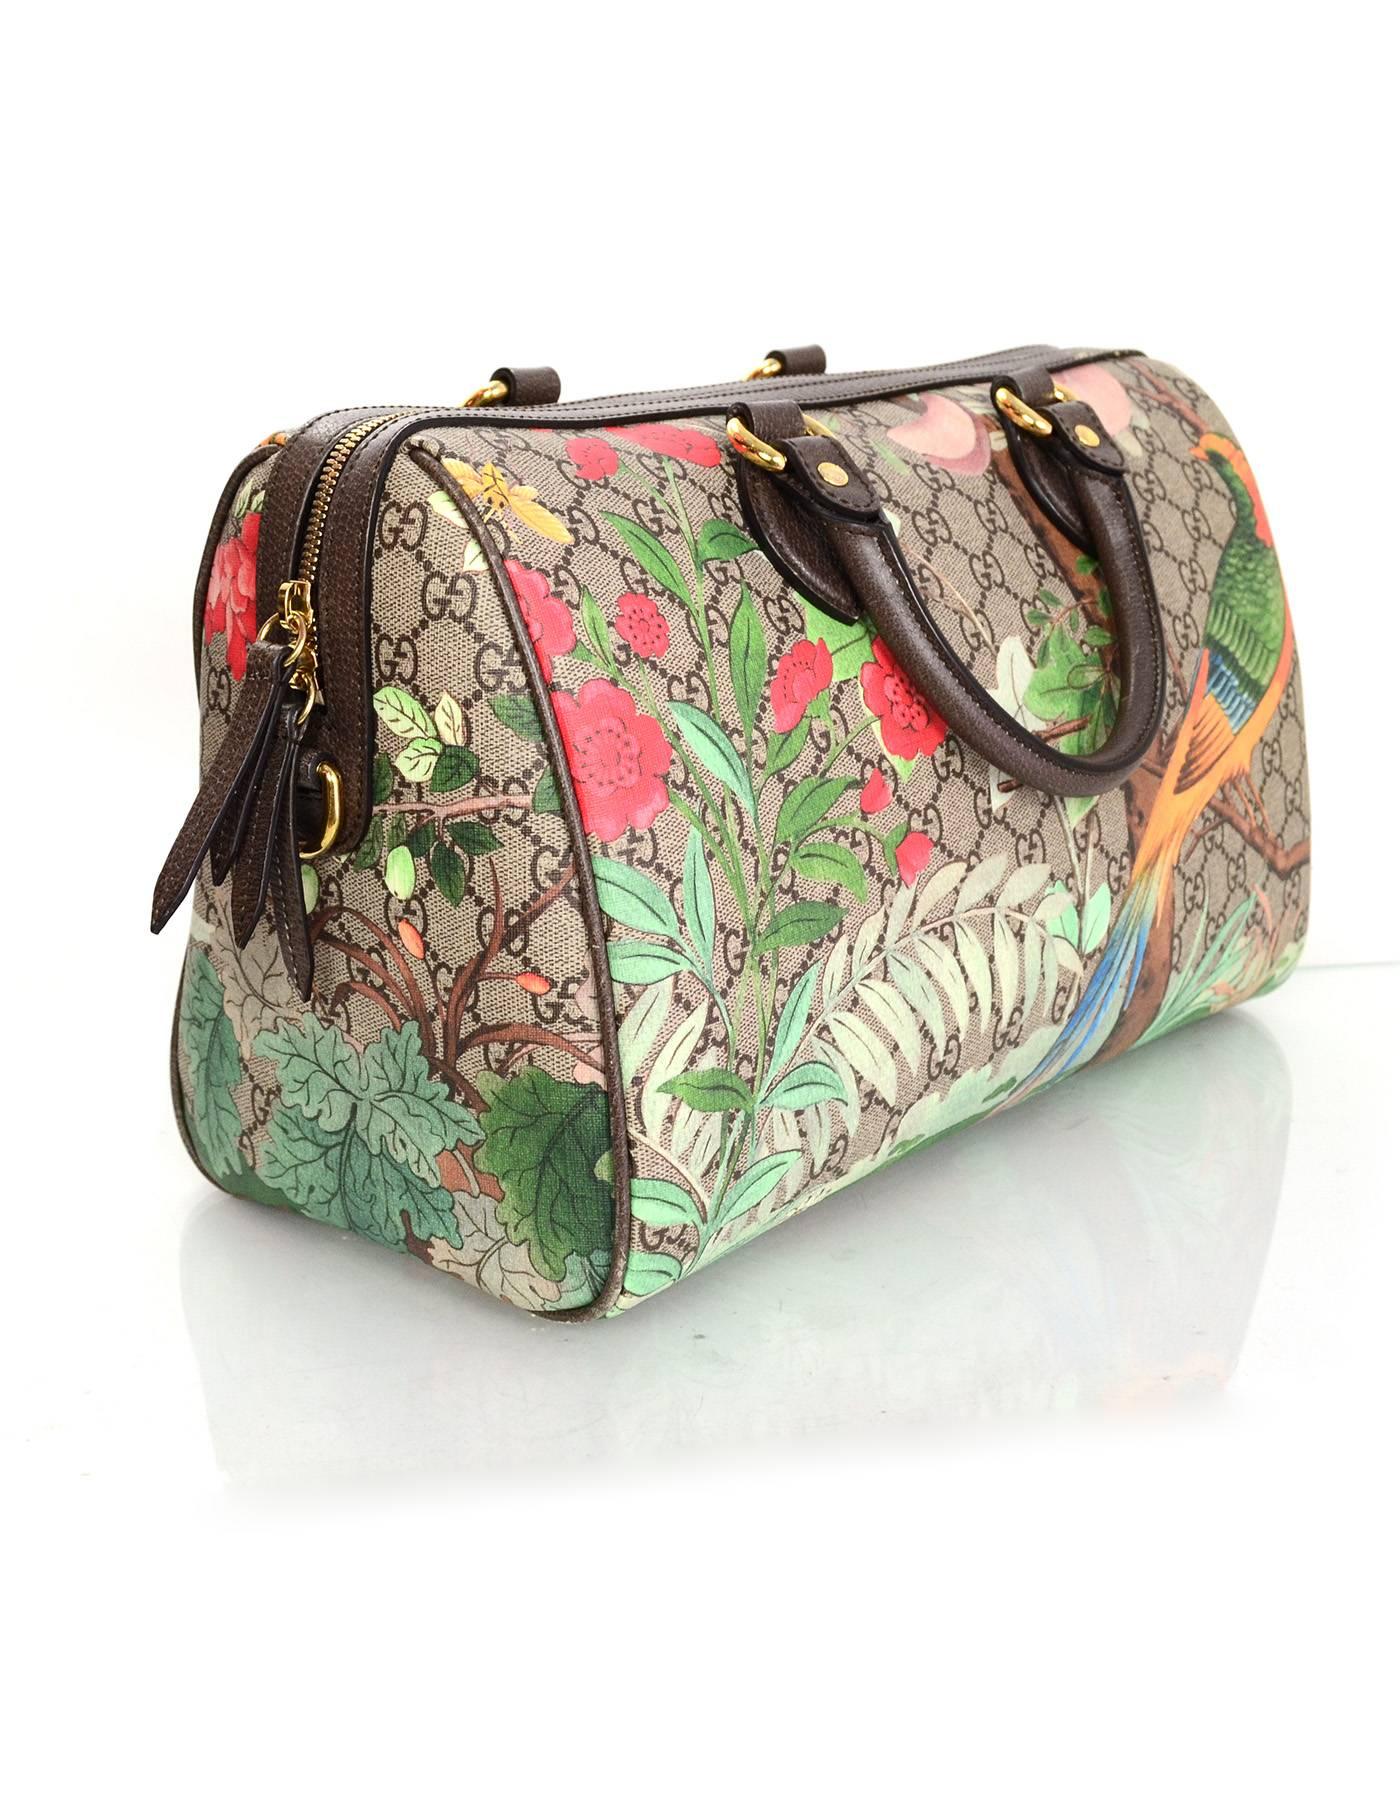 Gucci Monogram Tian Supreme Boston Bag
Features features flowers and bird printed over monogram

Made In: Italy
Color: Brown/taupe and multi-colored
Hardware: Goldtone
Materials: Leather and coated canvas
Lining: Light brown